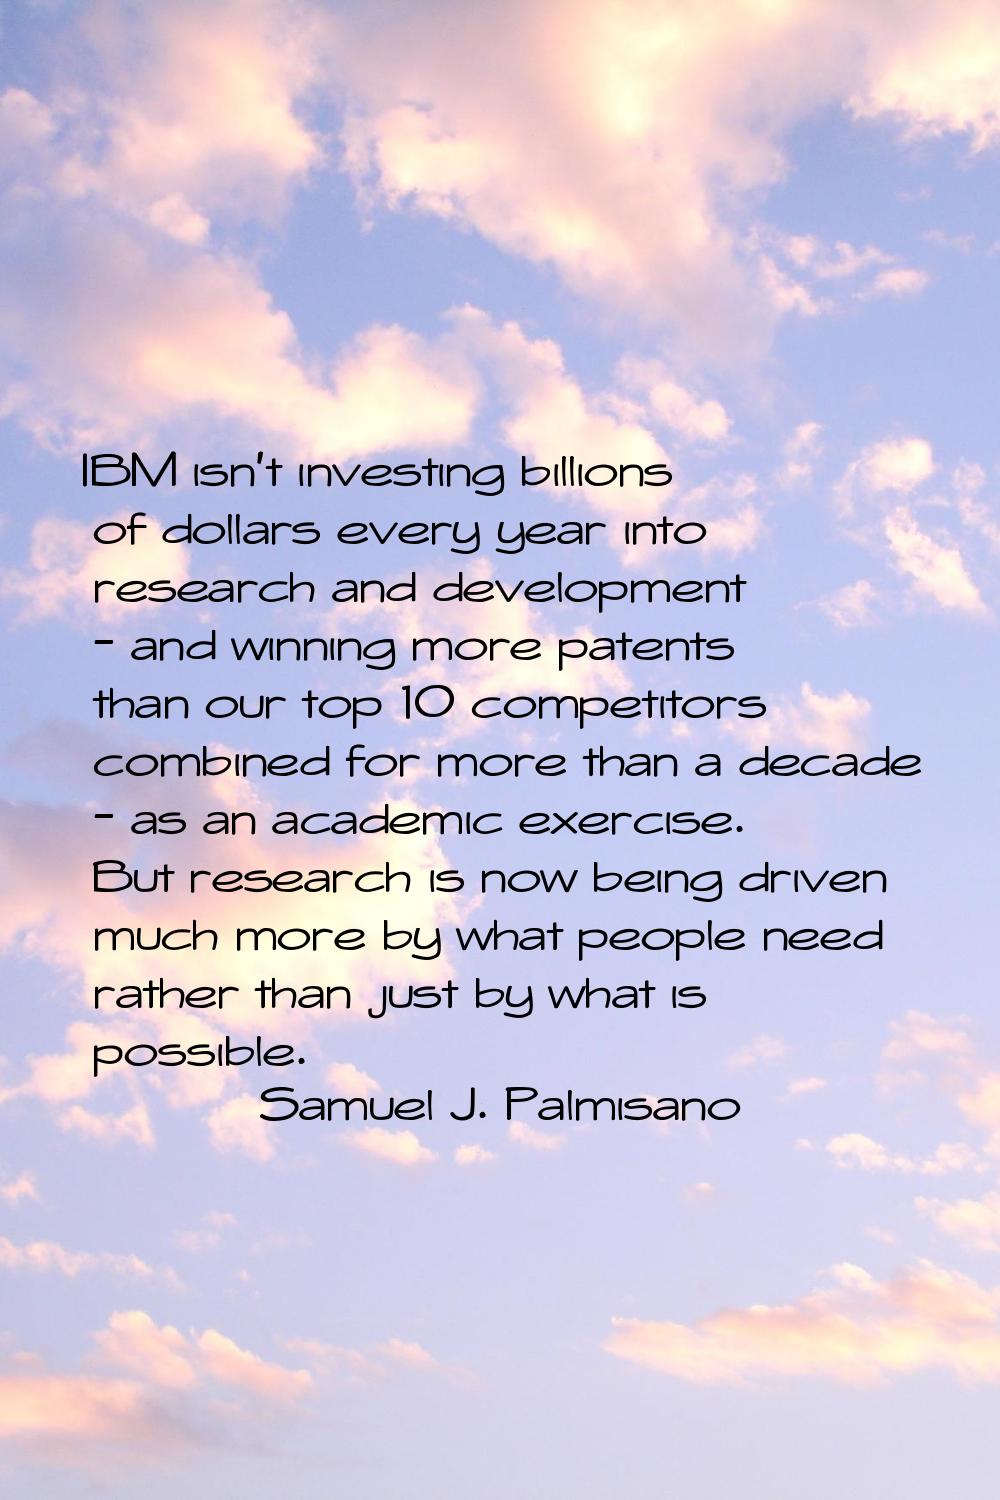 IBM isn't investing billions of dollars every year into research and development - and winning more